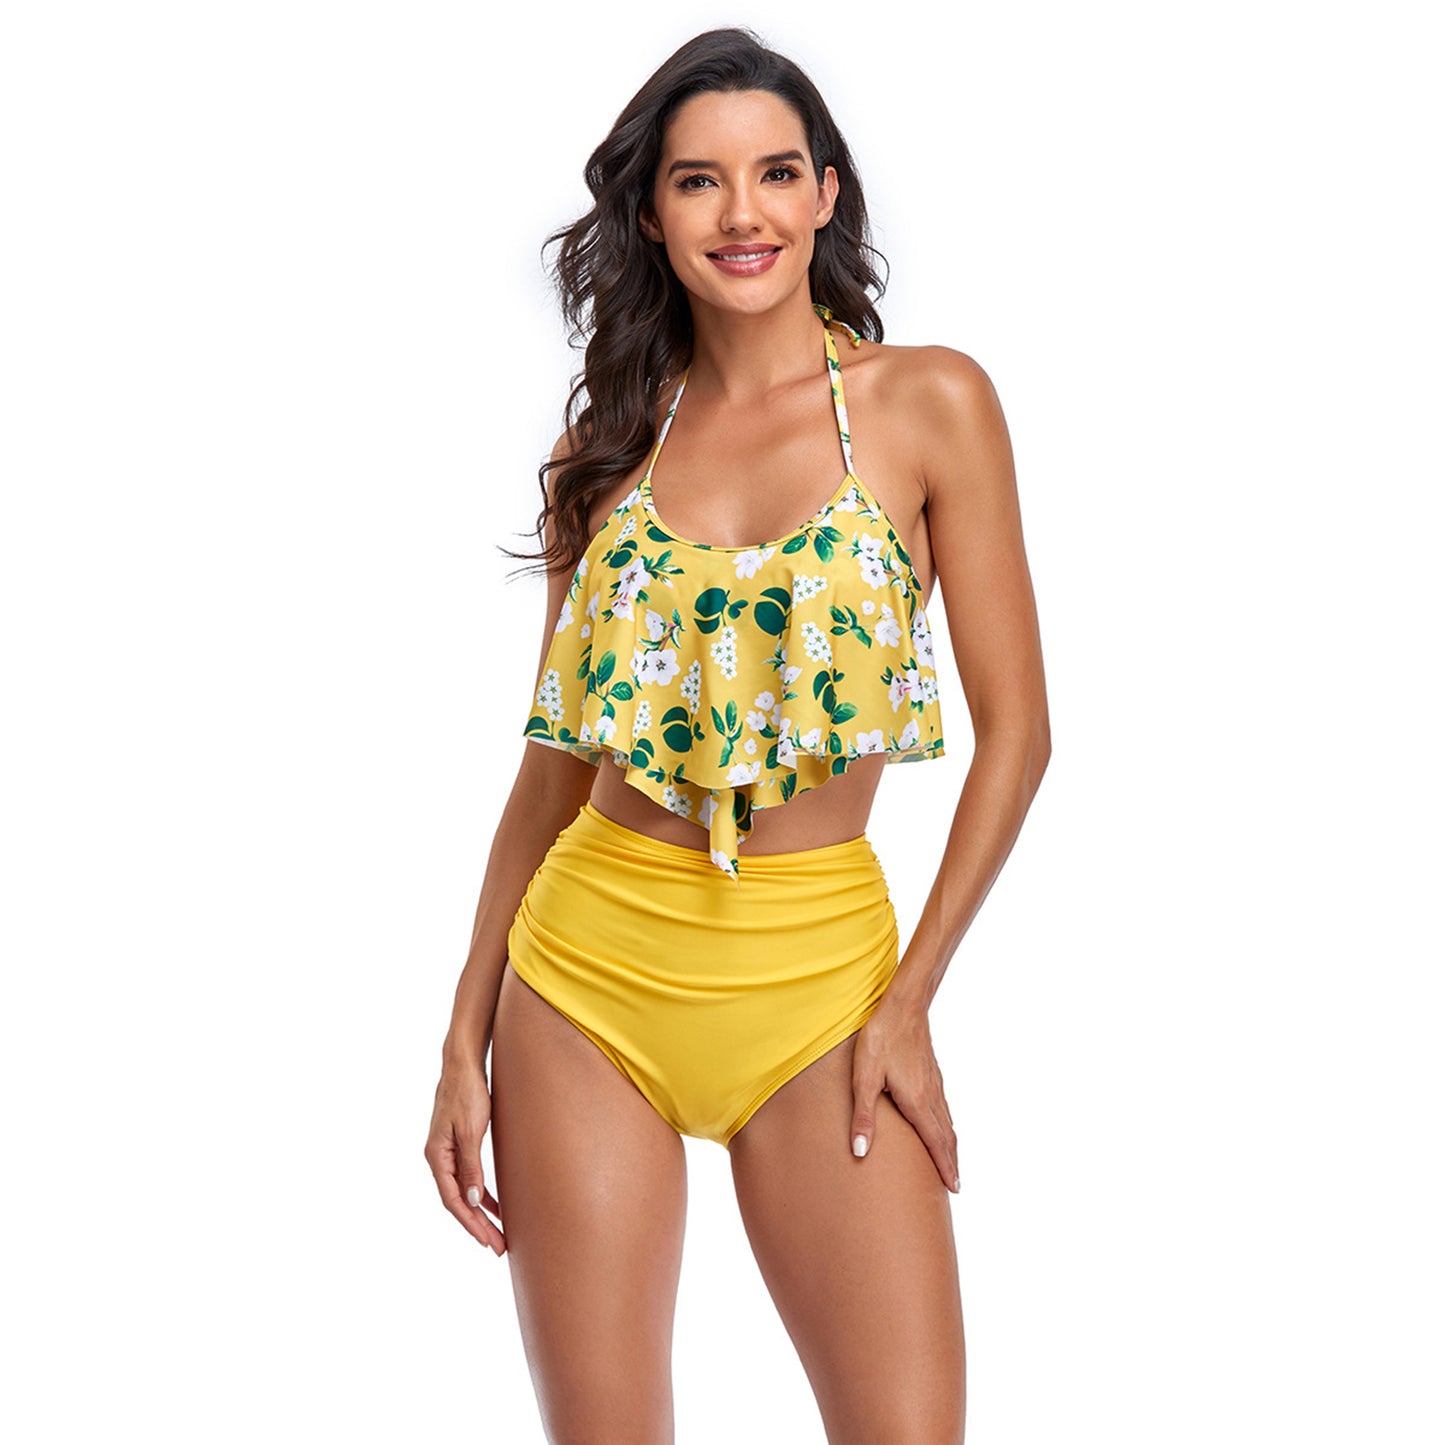 Floral Print Backless High Rise Two Piece Flounce Swimsuit Set